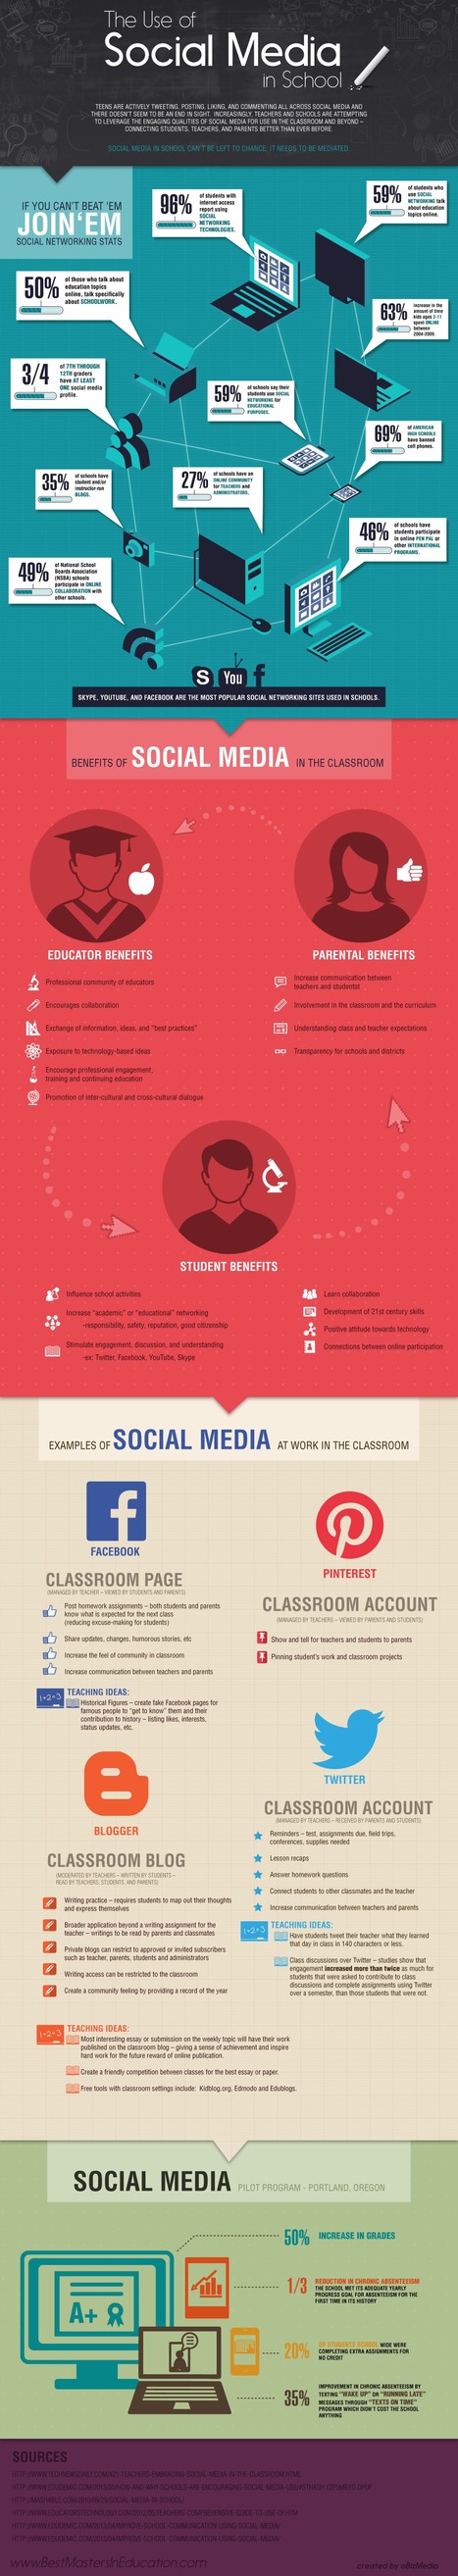 Social Media 101: Is There a Place For Social Media in Classrooms? [Infographic] | Strictly pedagogical | Scoop.it